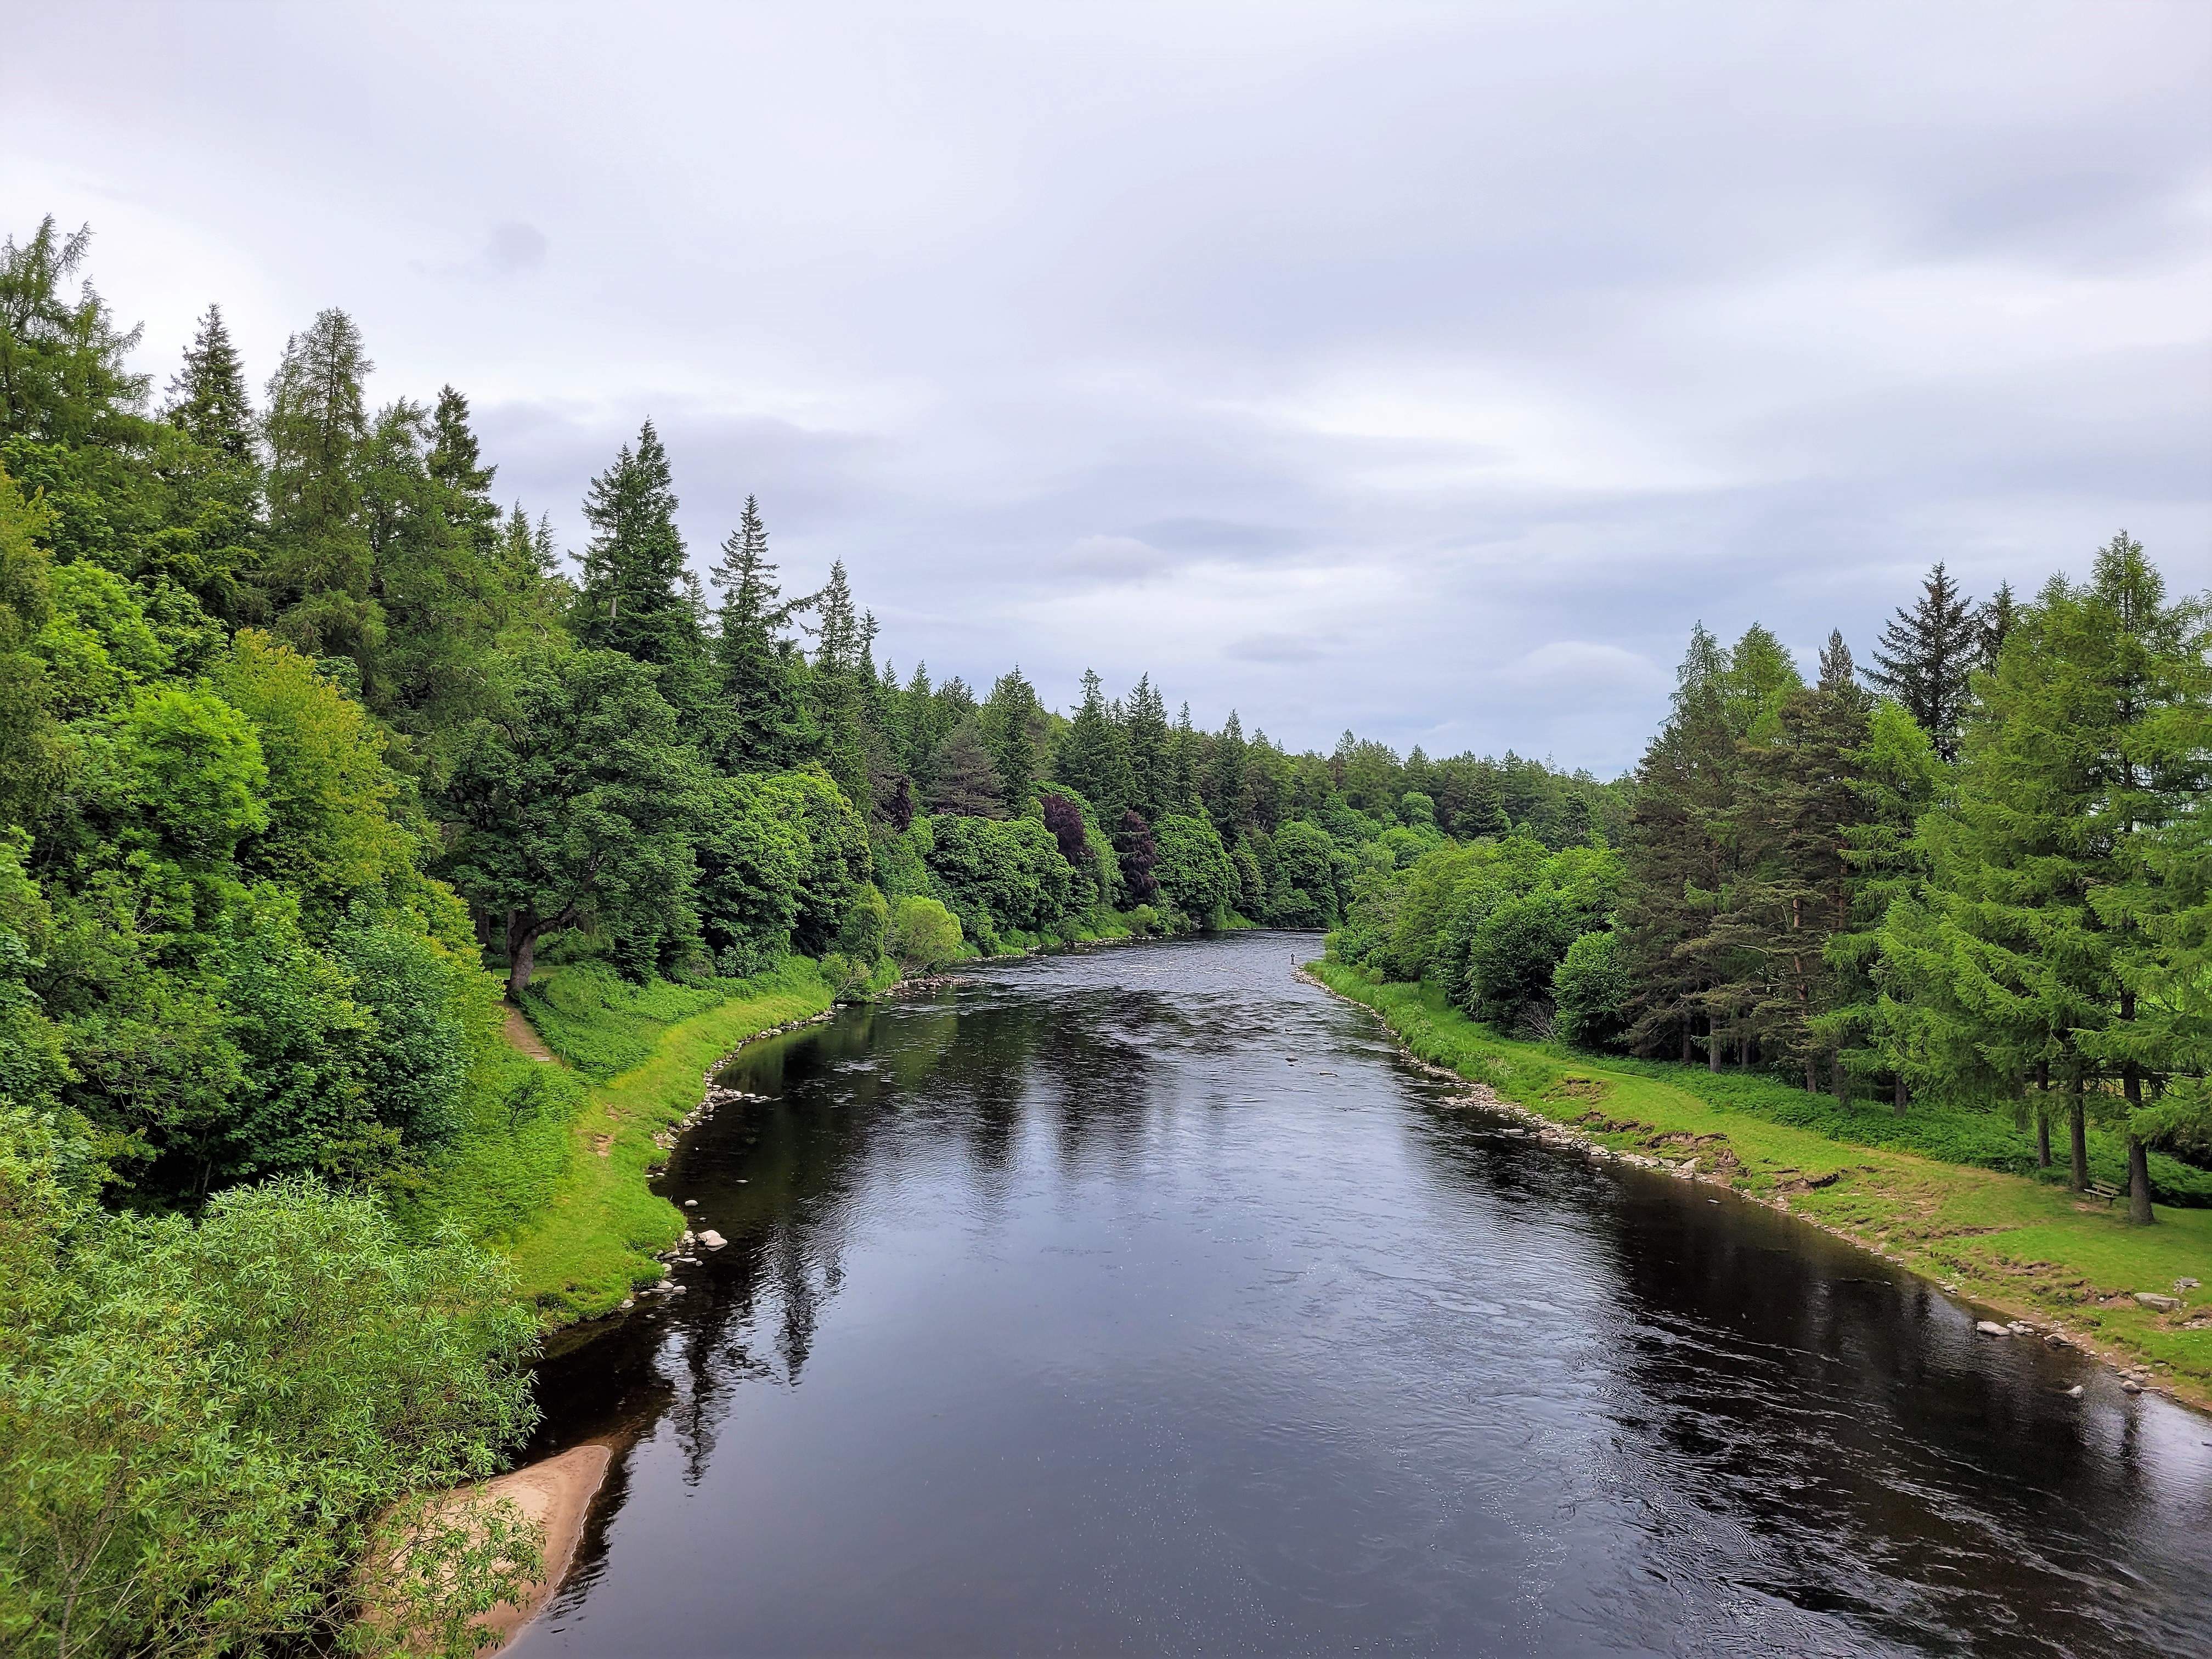 The beautiful River Spey from the bridge in Carron